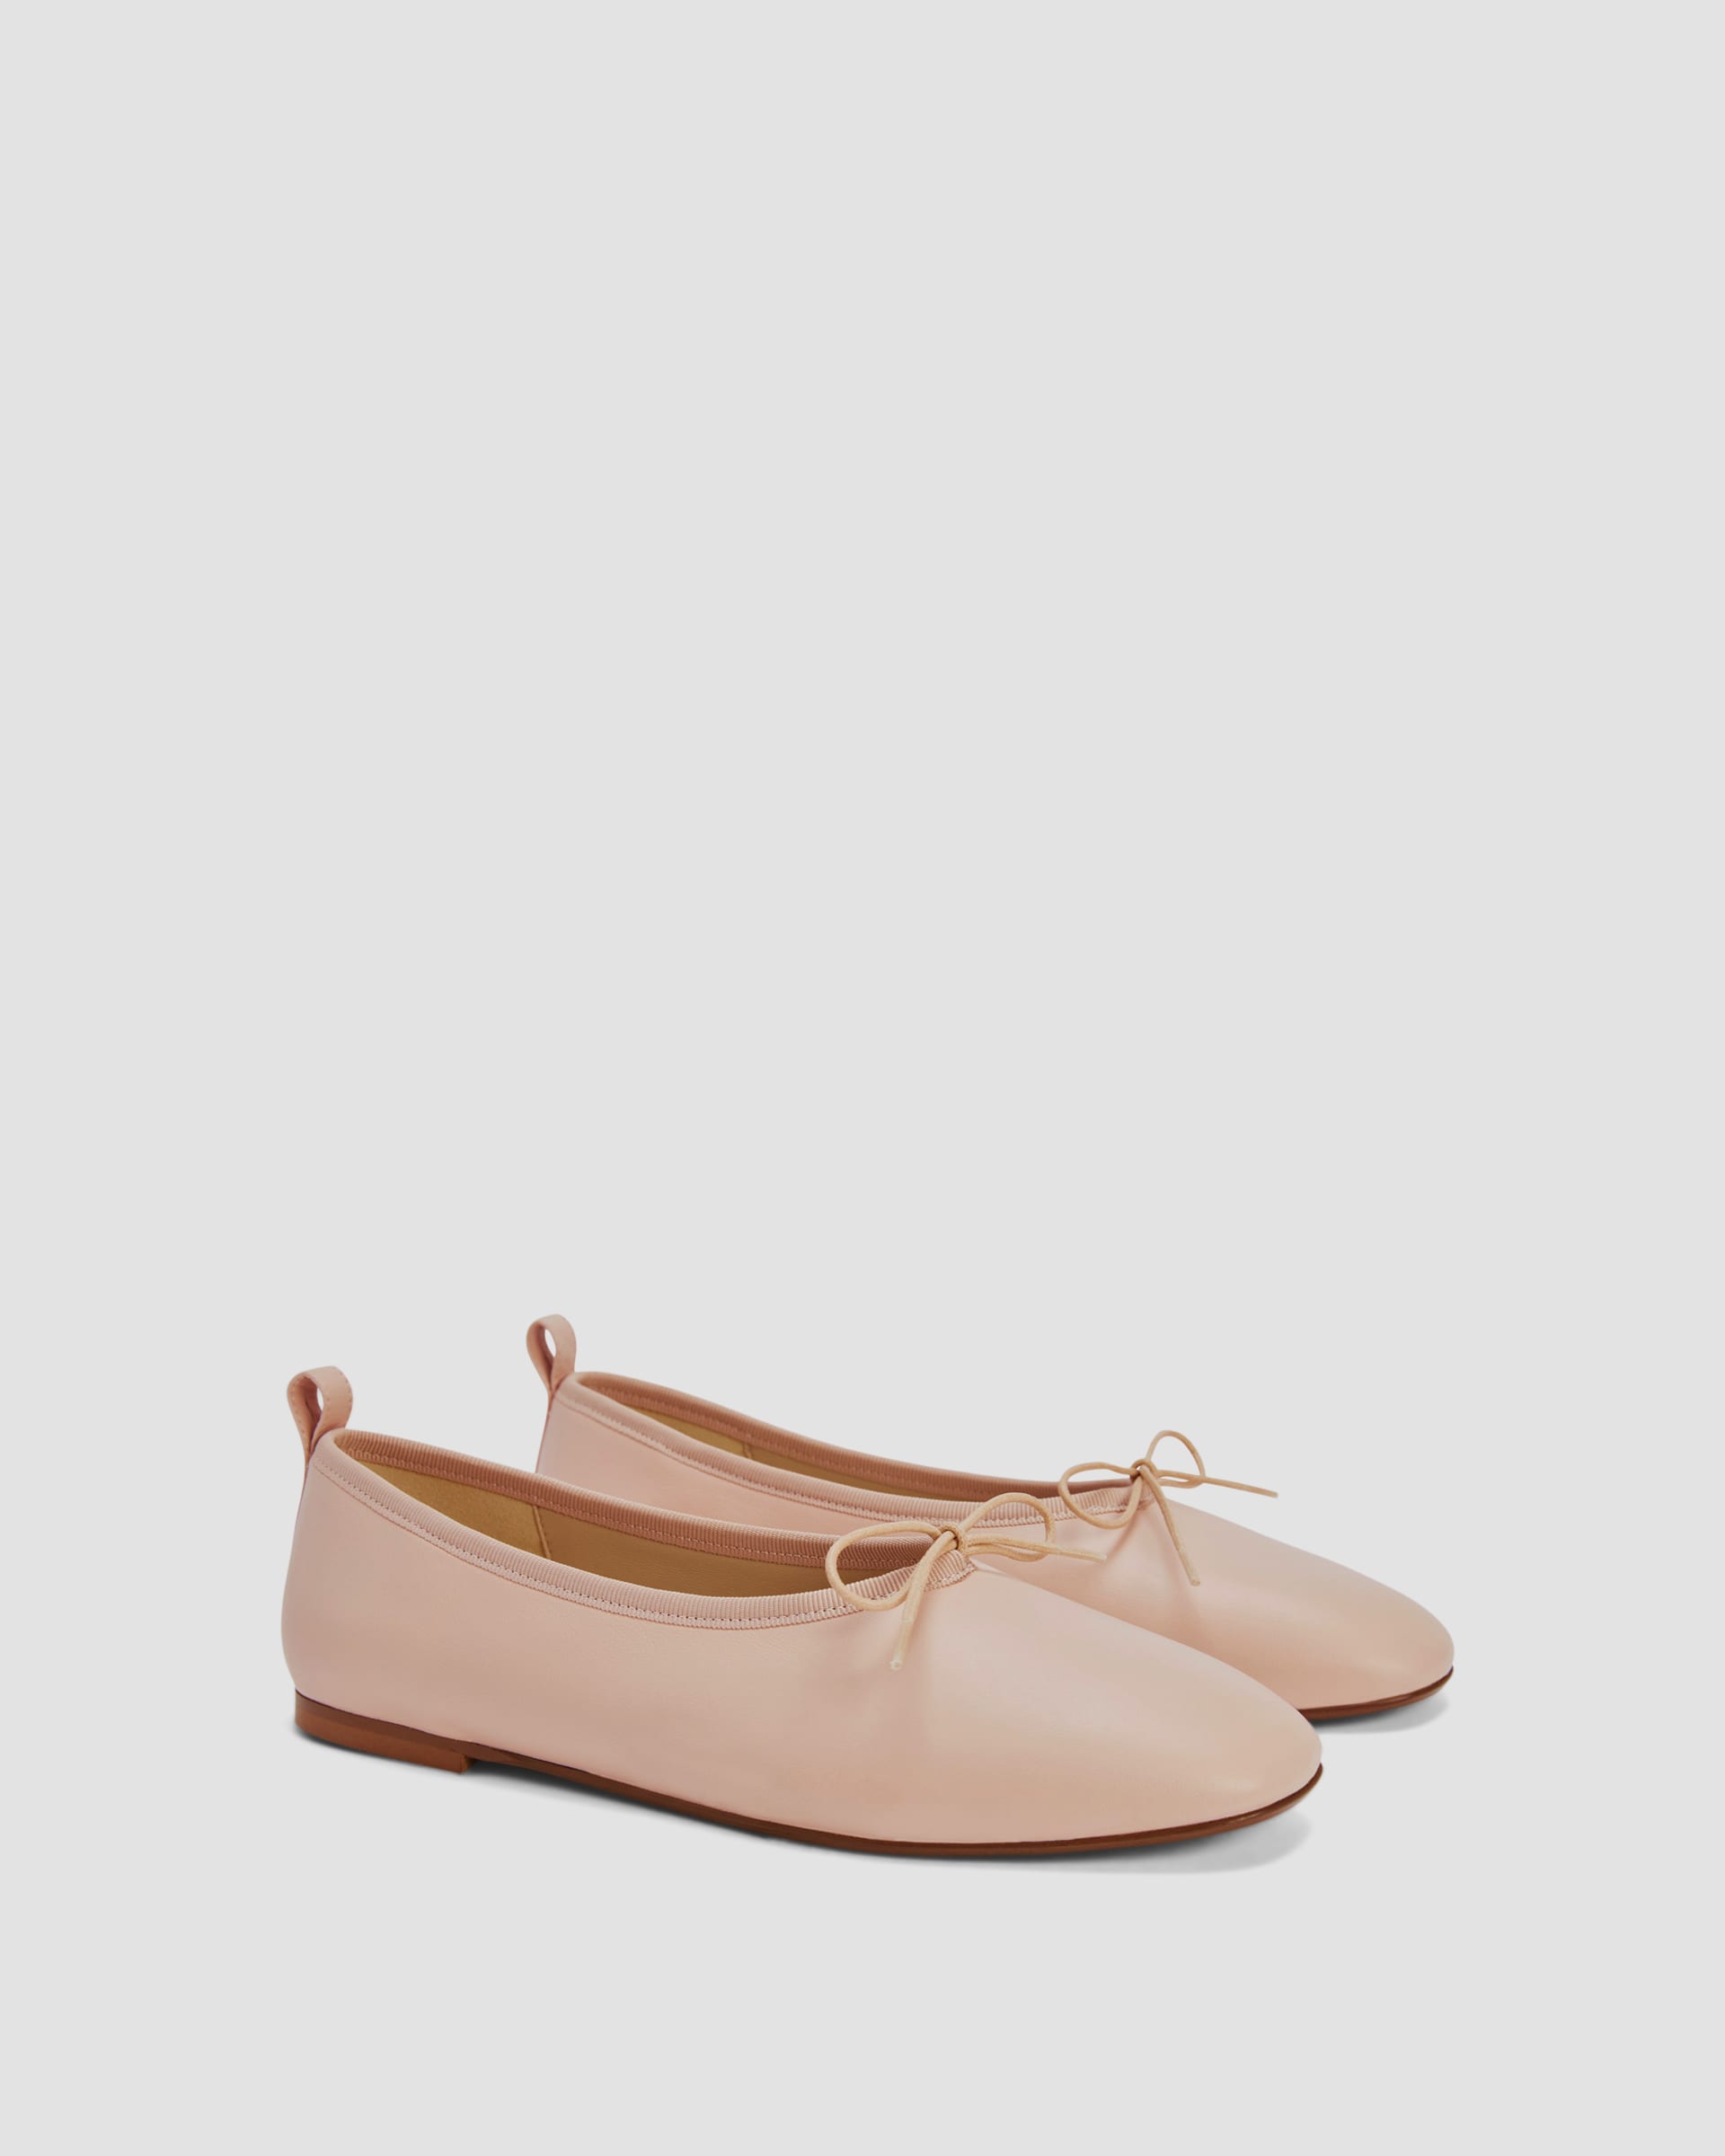 The Day Ballet Flat Pale Pink / Tan Lining – Everlane